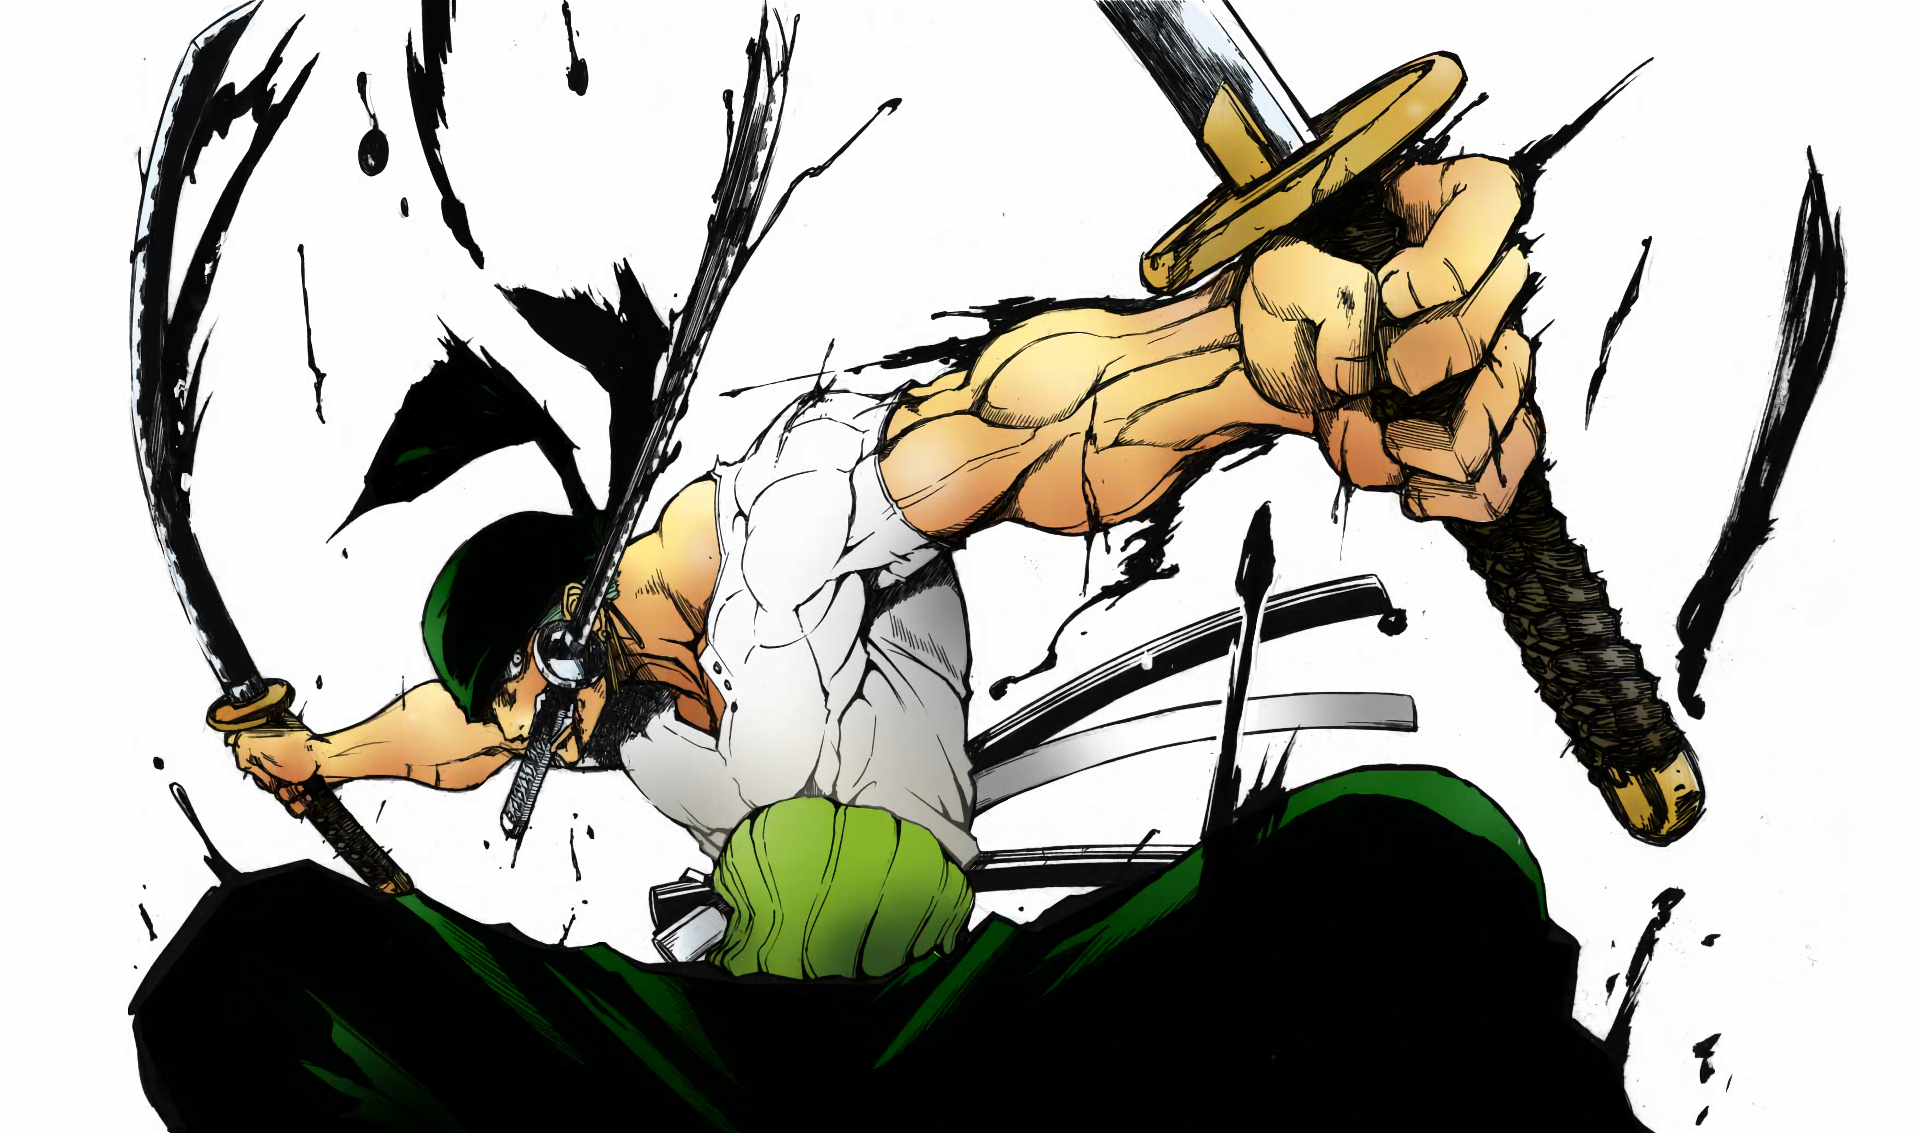 Anime character Roronoa Zoro from One Piece wielding the powerful Santoryu technique.